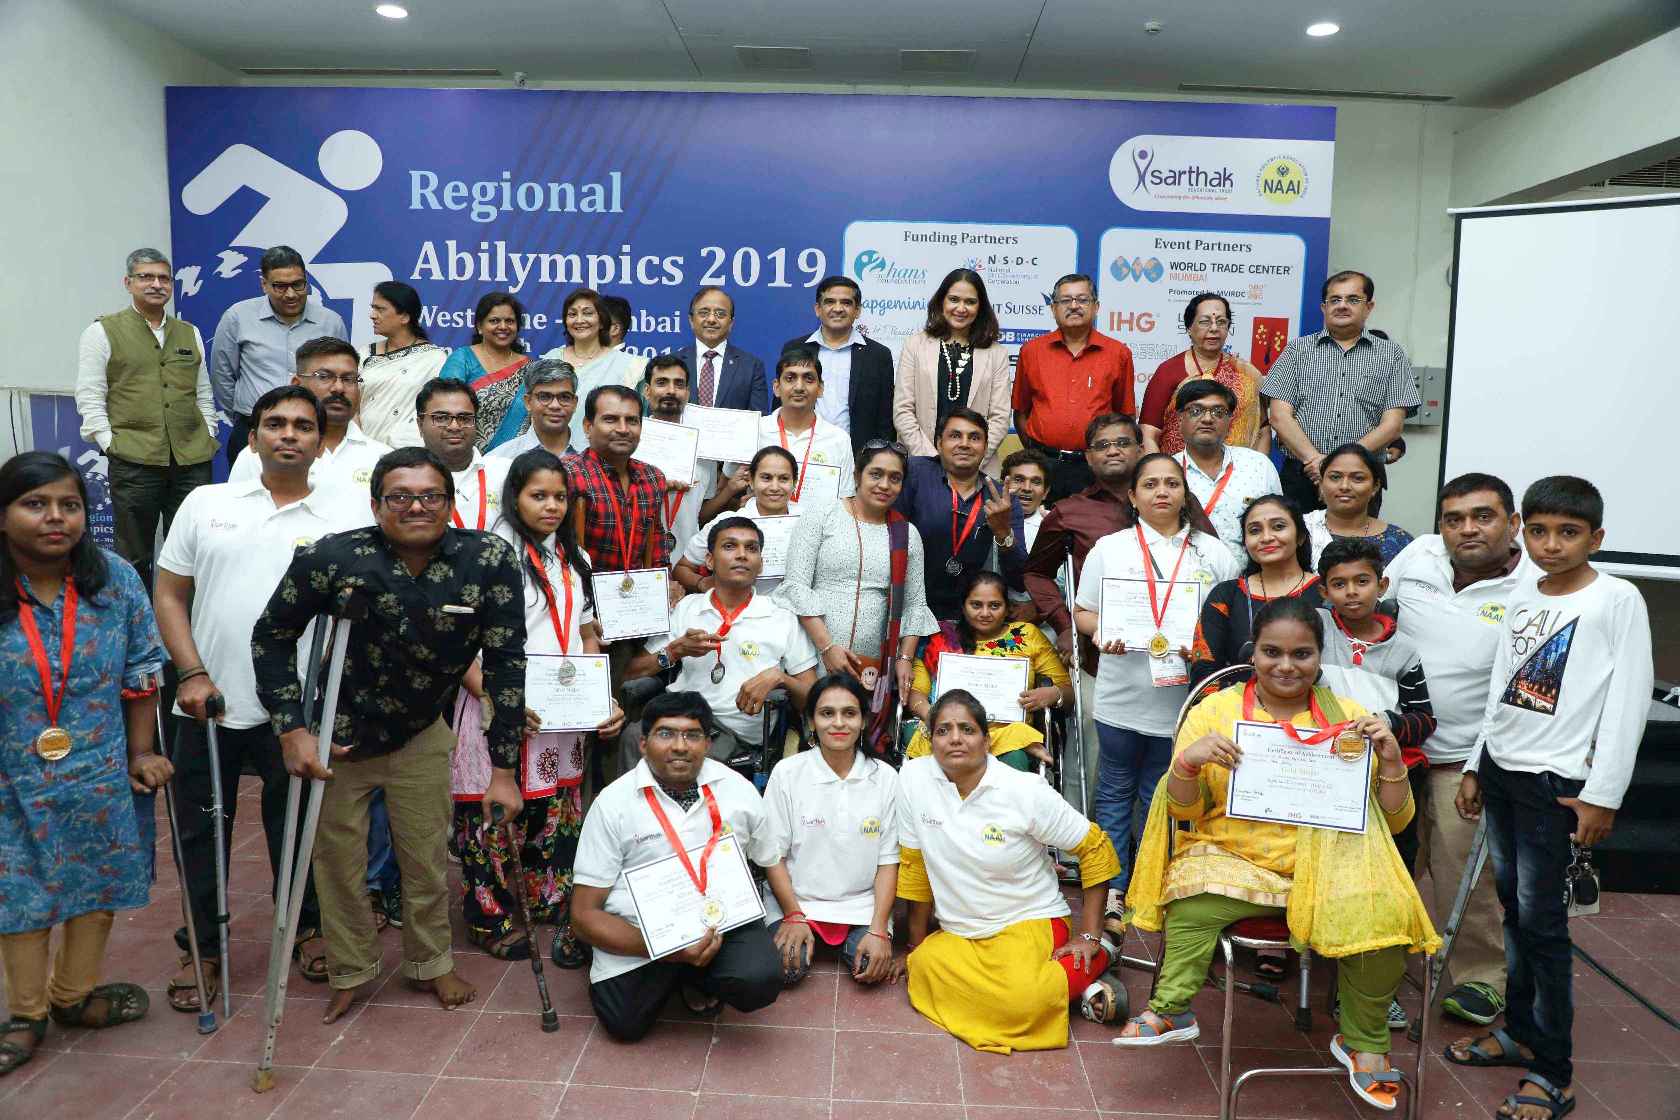 delhi-to-host-north-zone-regional-abilympics-showcasing-the-talent-of-people-with-disabilities